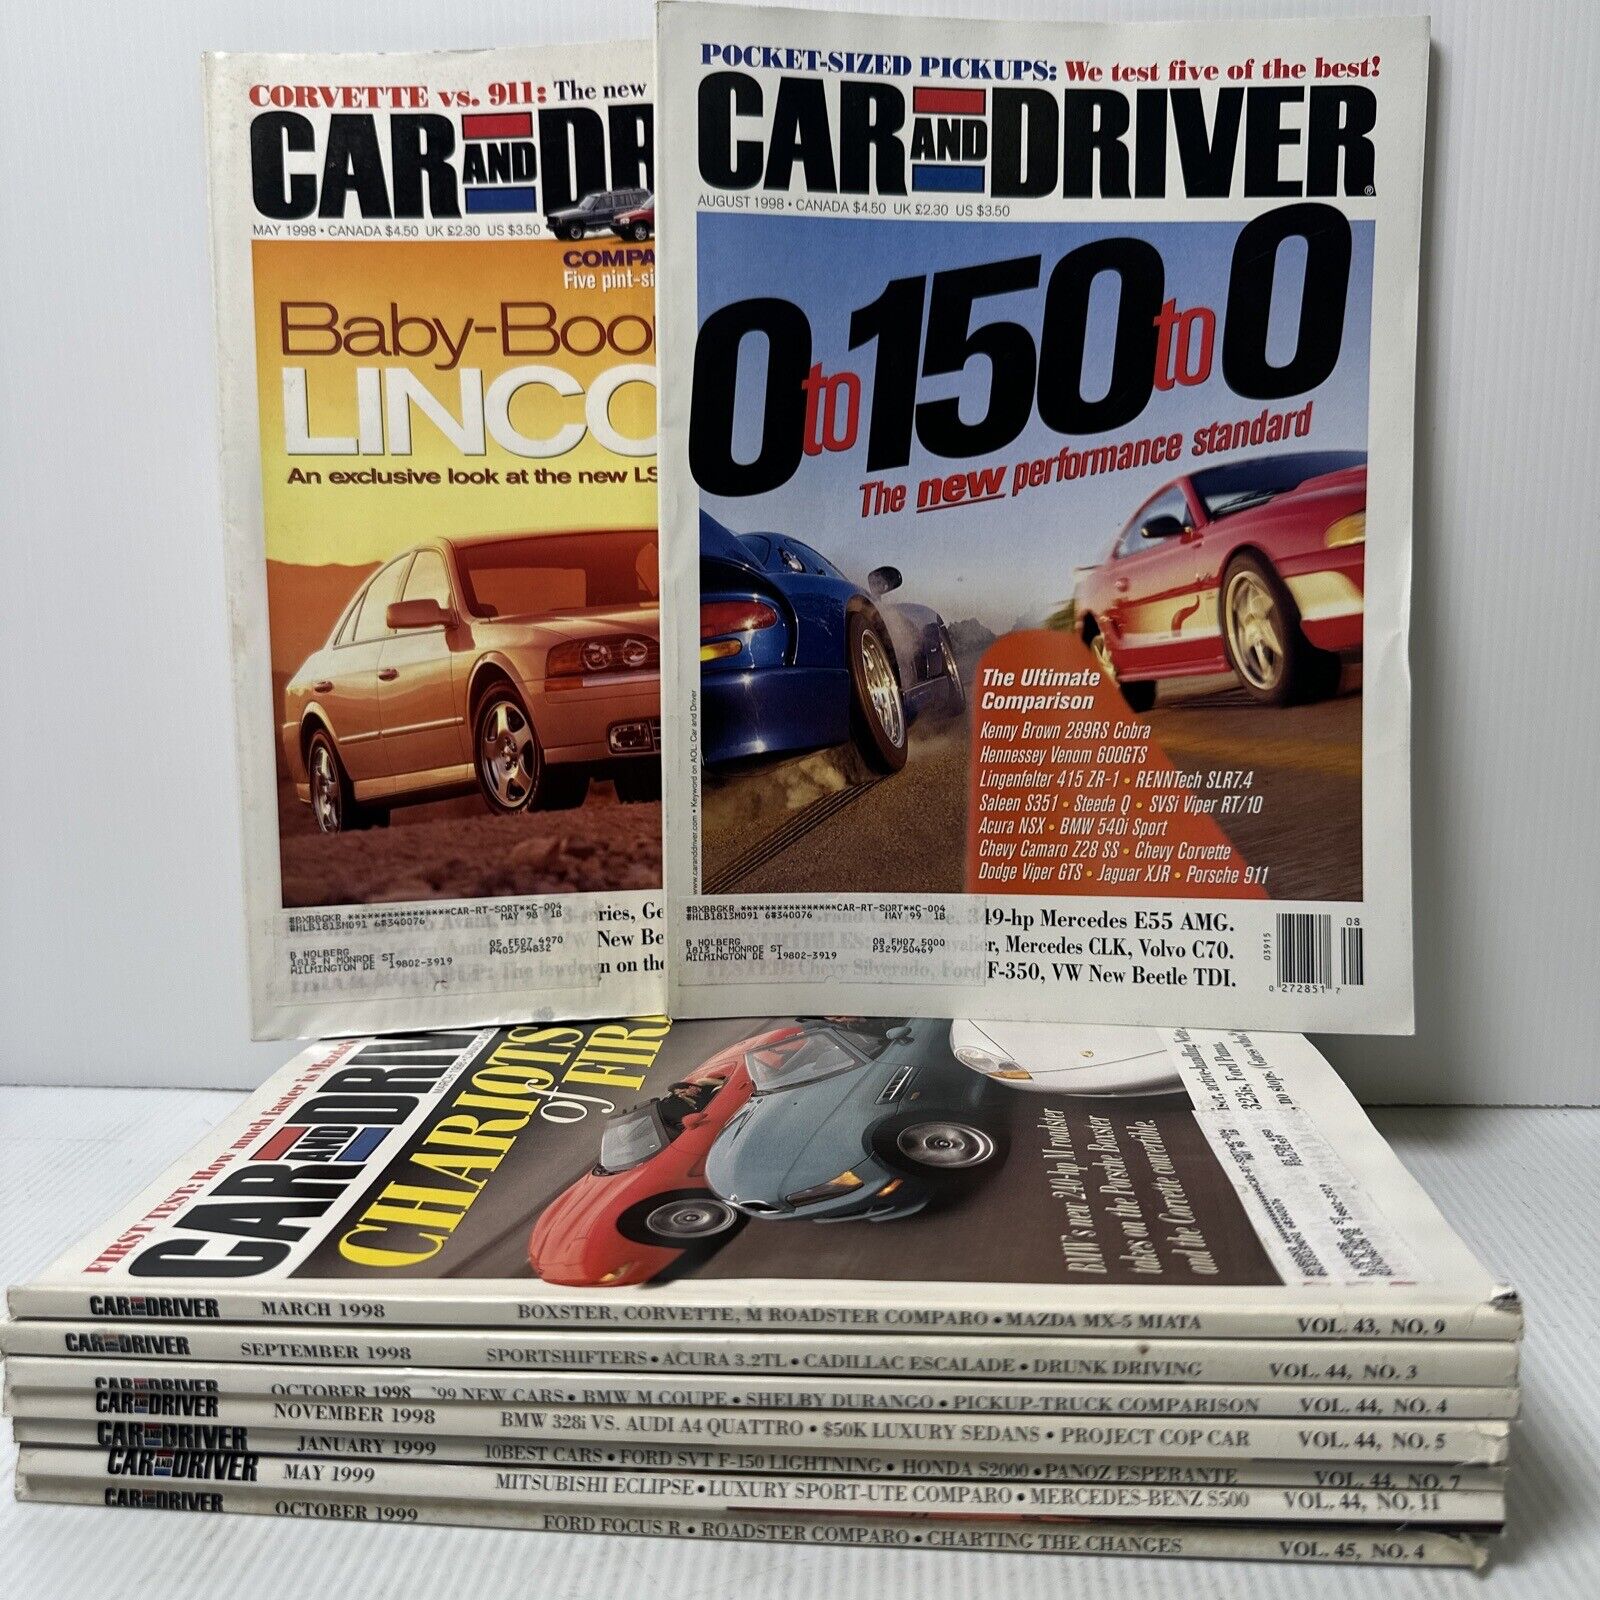 Car and Driver Magazine 1998 & 1999 Vintage Automobile Lot of 9 Issues - Collect